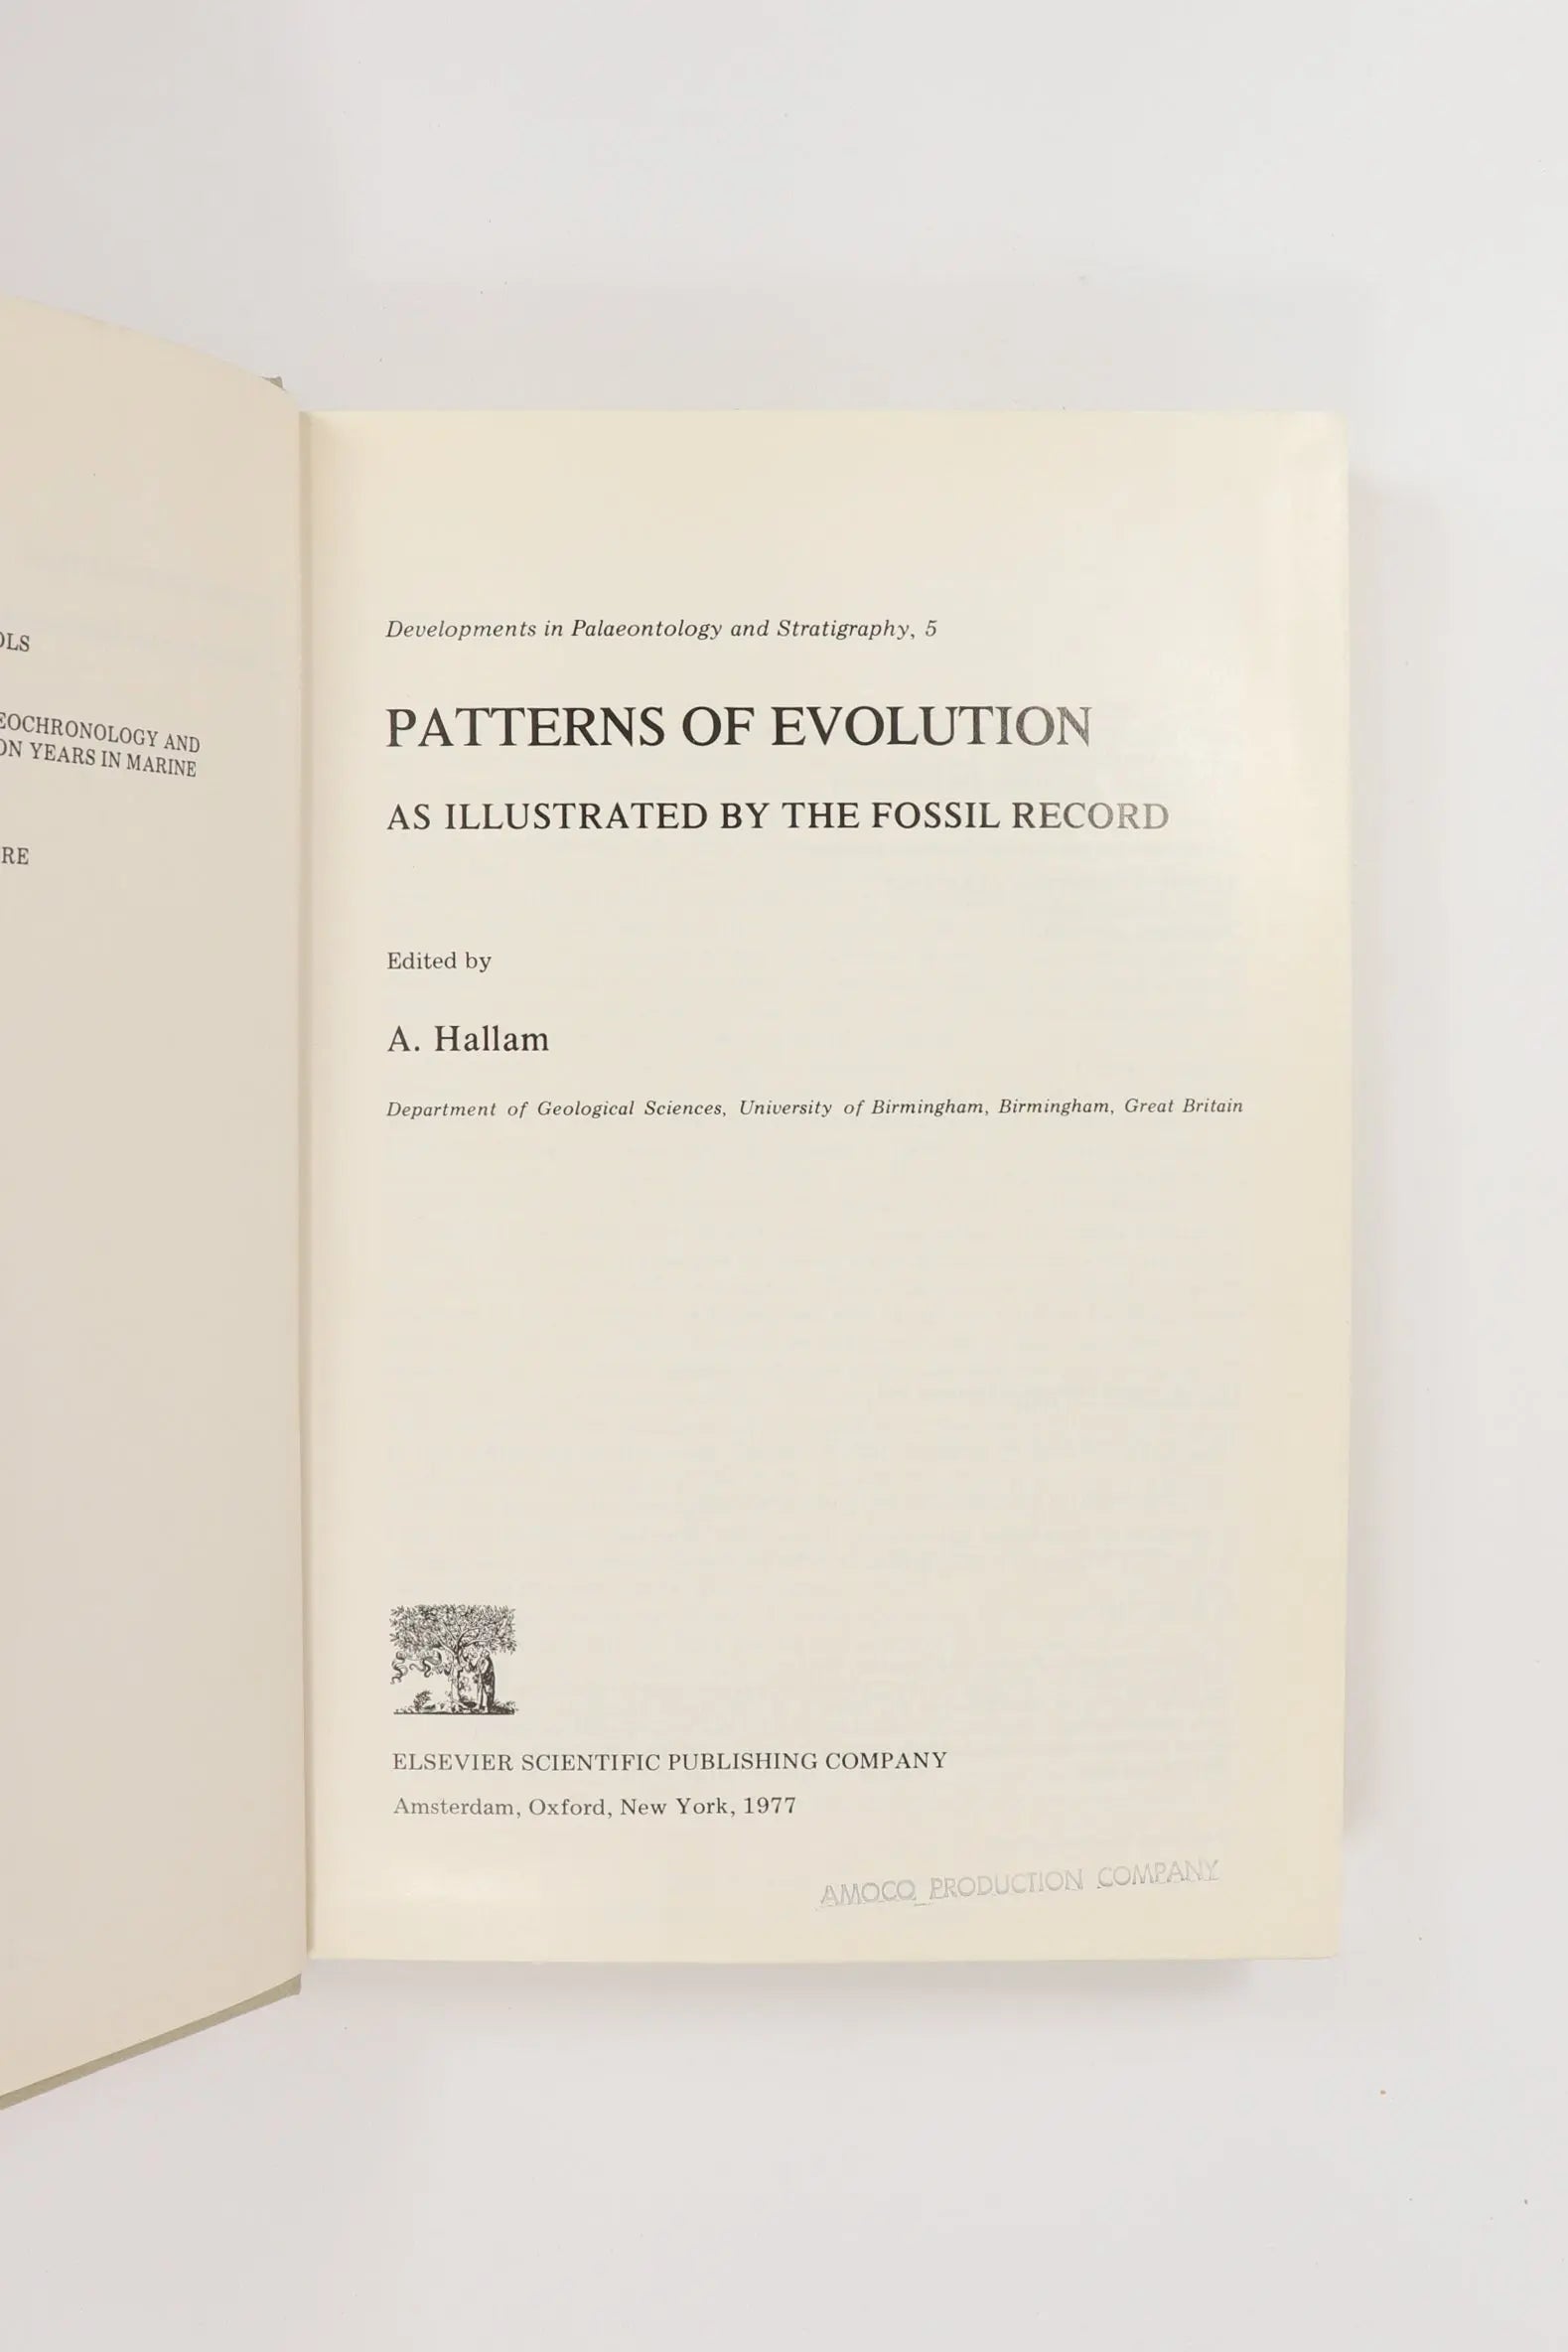 Patterns of Evolution - THE STEMCELL SCIENCE SHOP